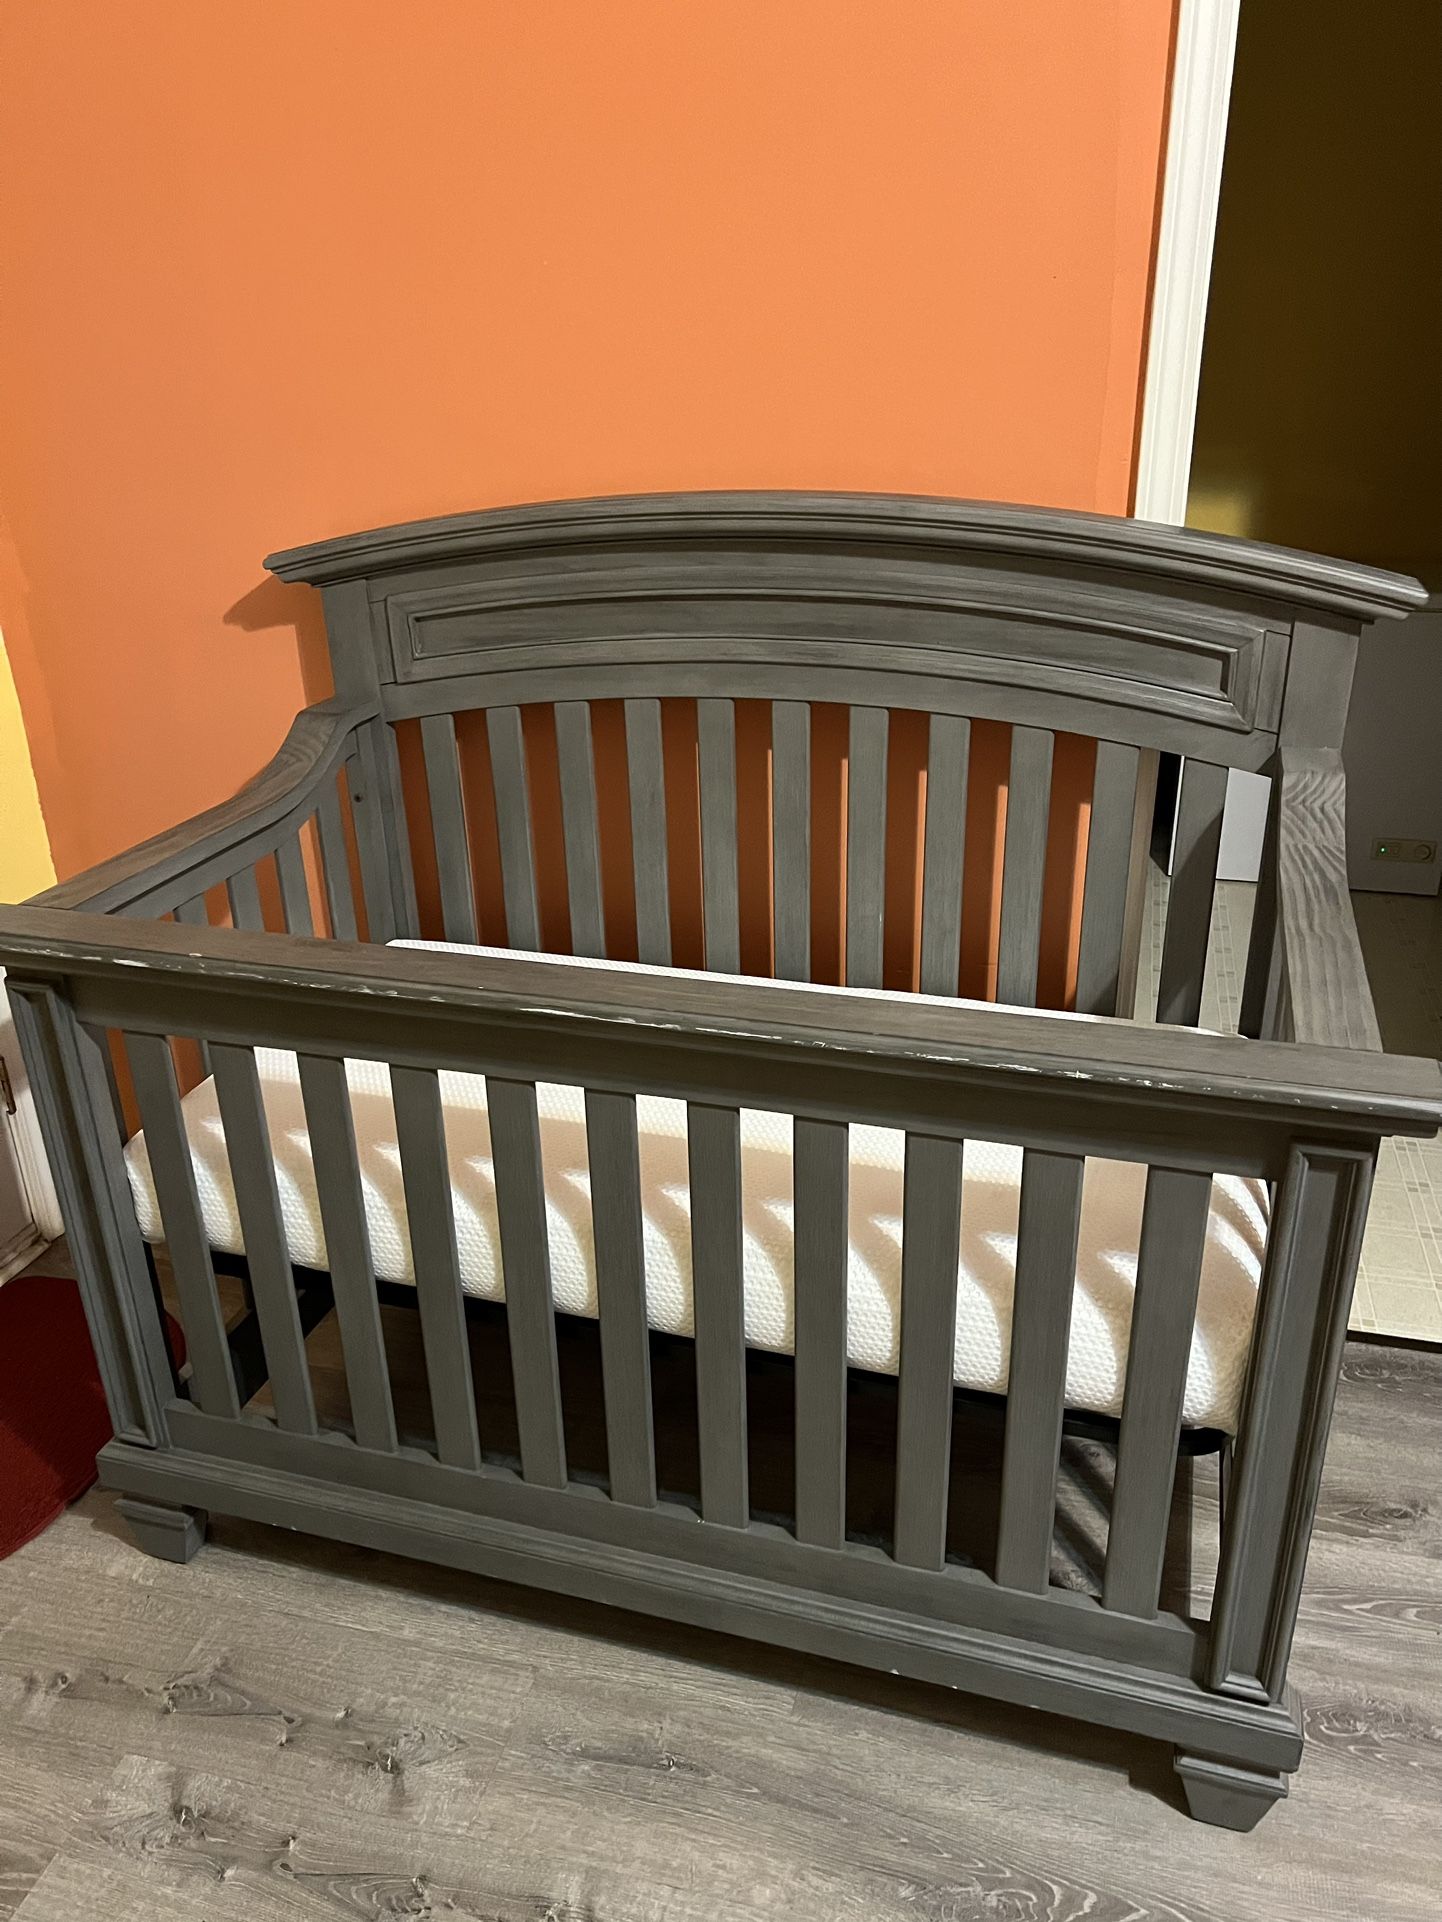 Baby Gray Crib With Mattress Include 